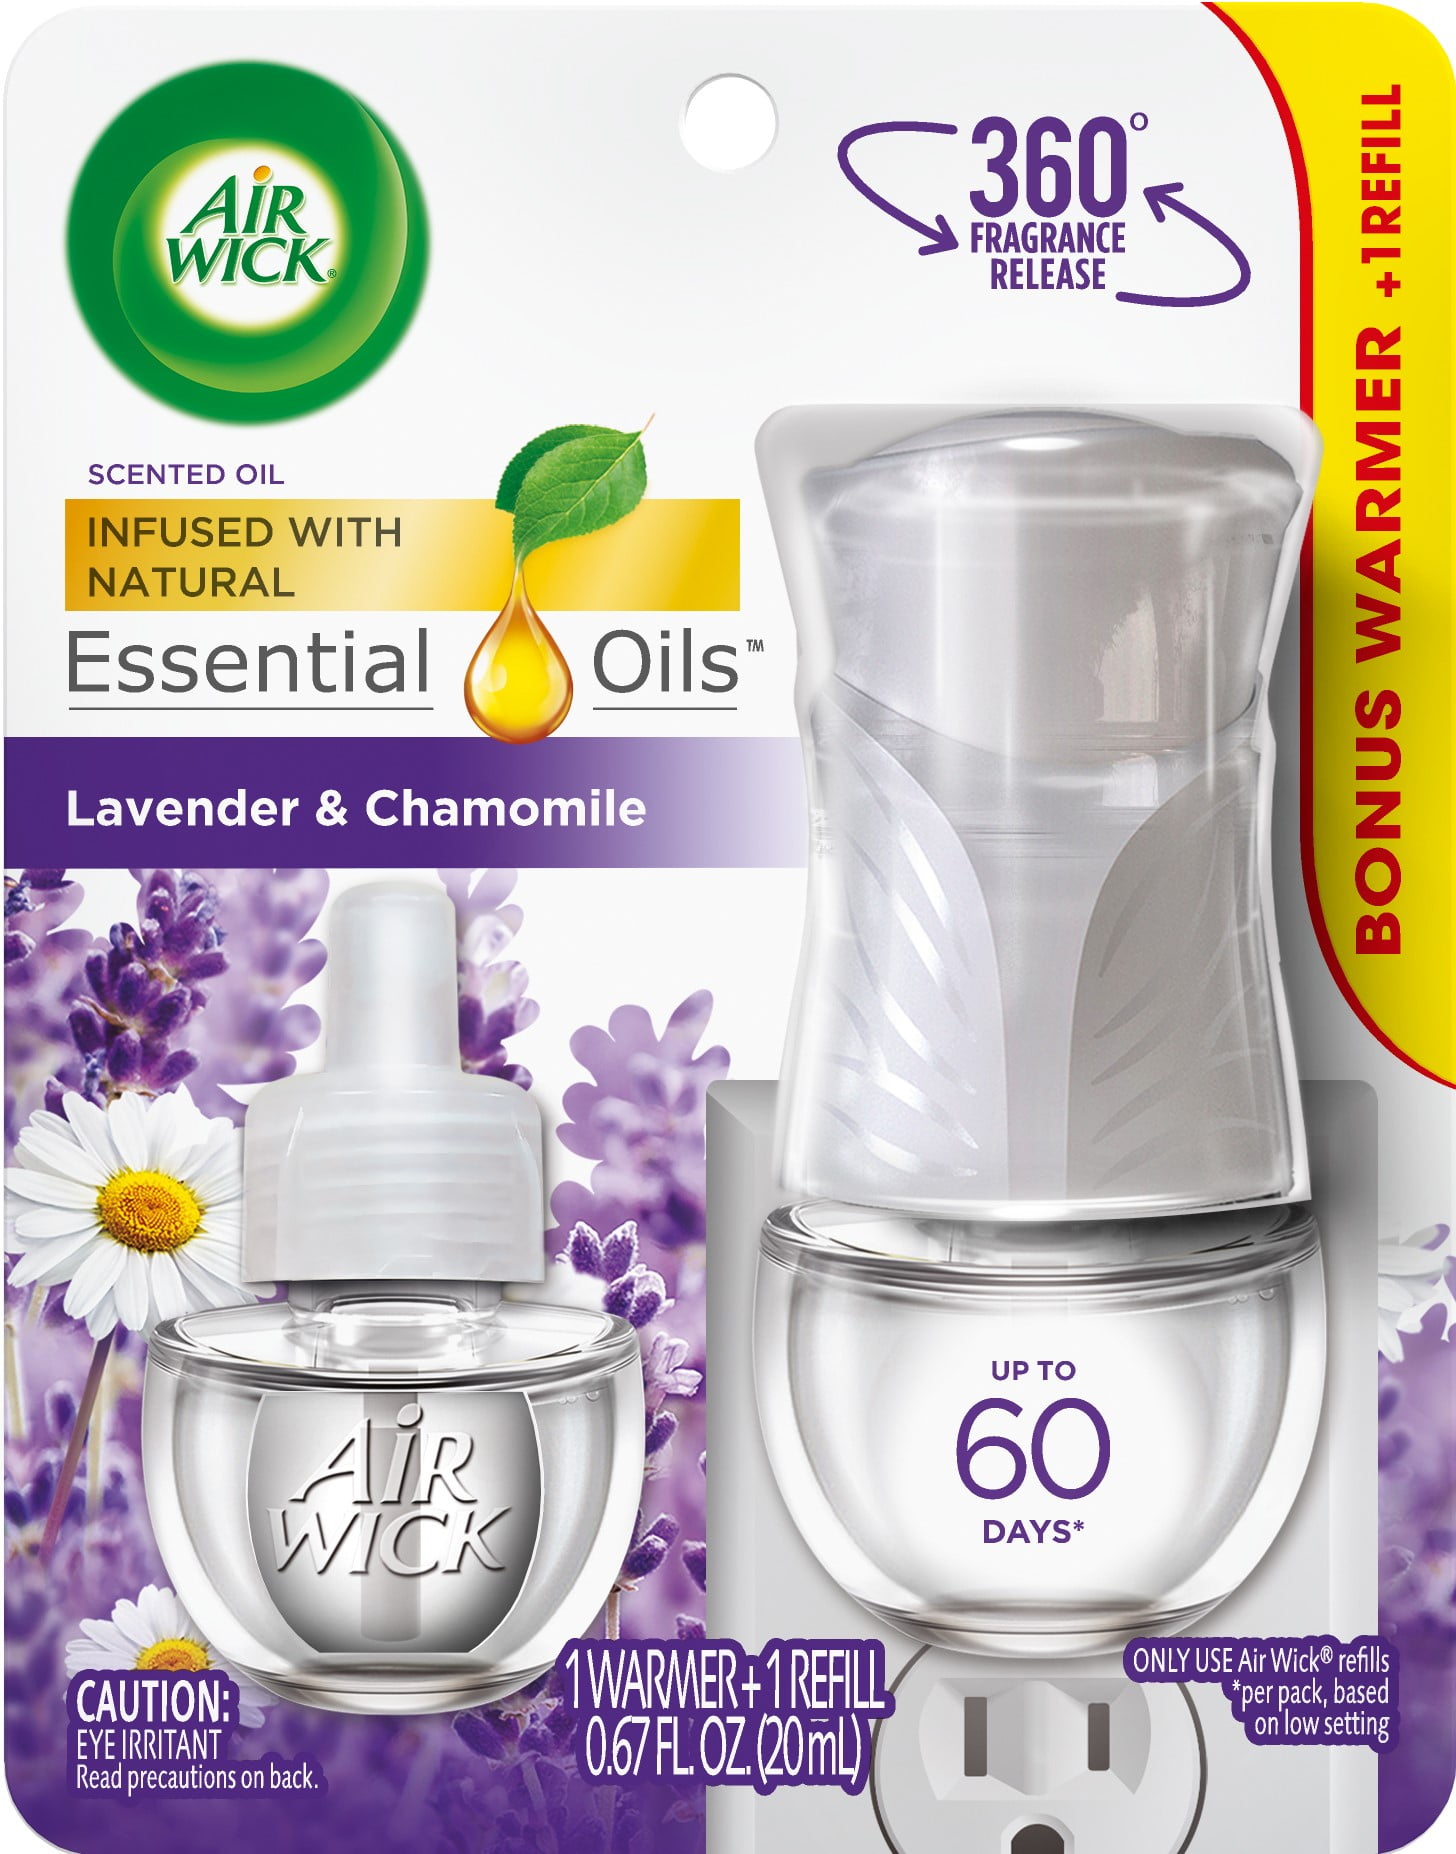 Air Wick Plug in Scented Oil Starter Kit (Warmer + 1 Refill), Lavender and Chamomile, Air Freshener, Essential Oils